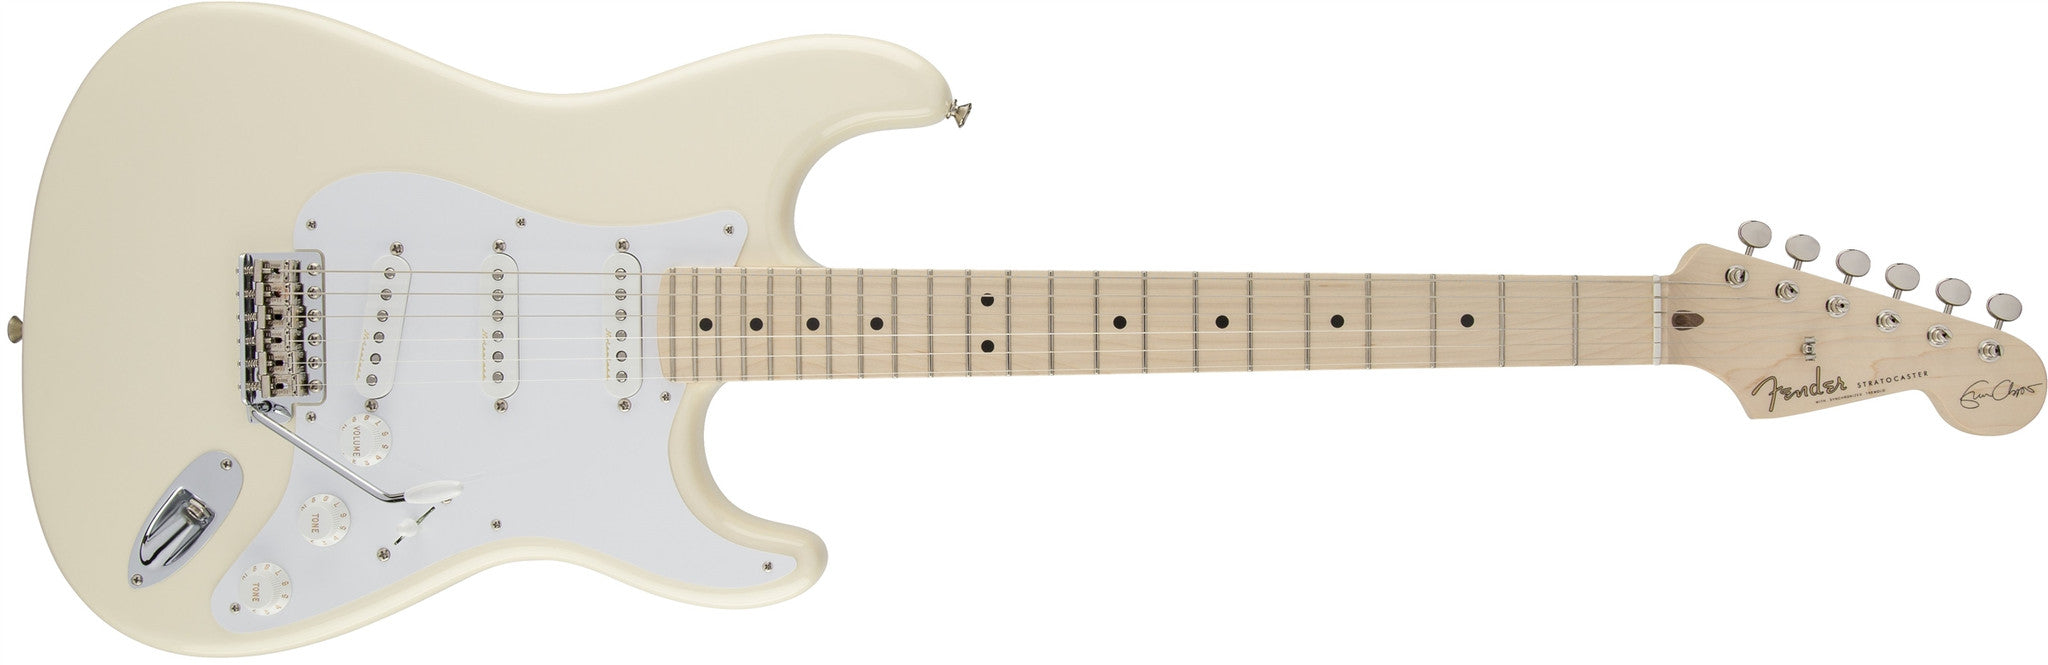 Fender Eric Clapton Stratocaster®, Maple Fingerboard, Olympic White 0117602805 - L.A. Music - Canada's Favourite Music Store!